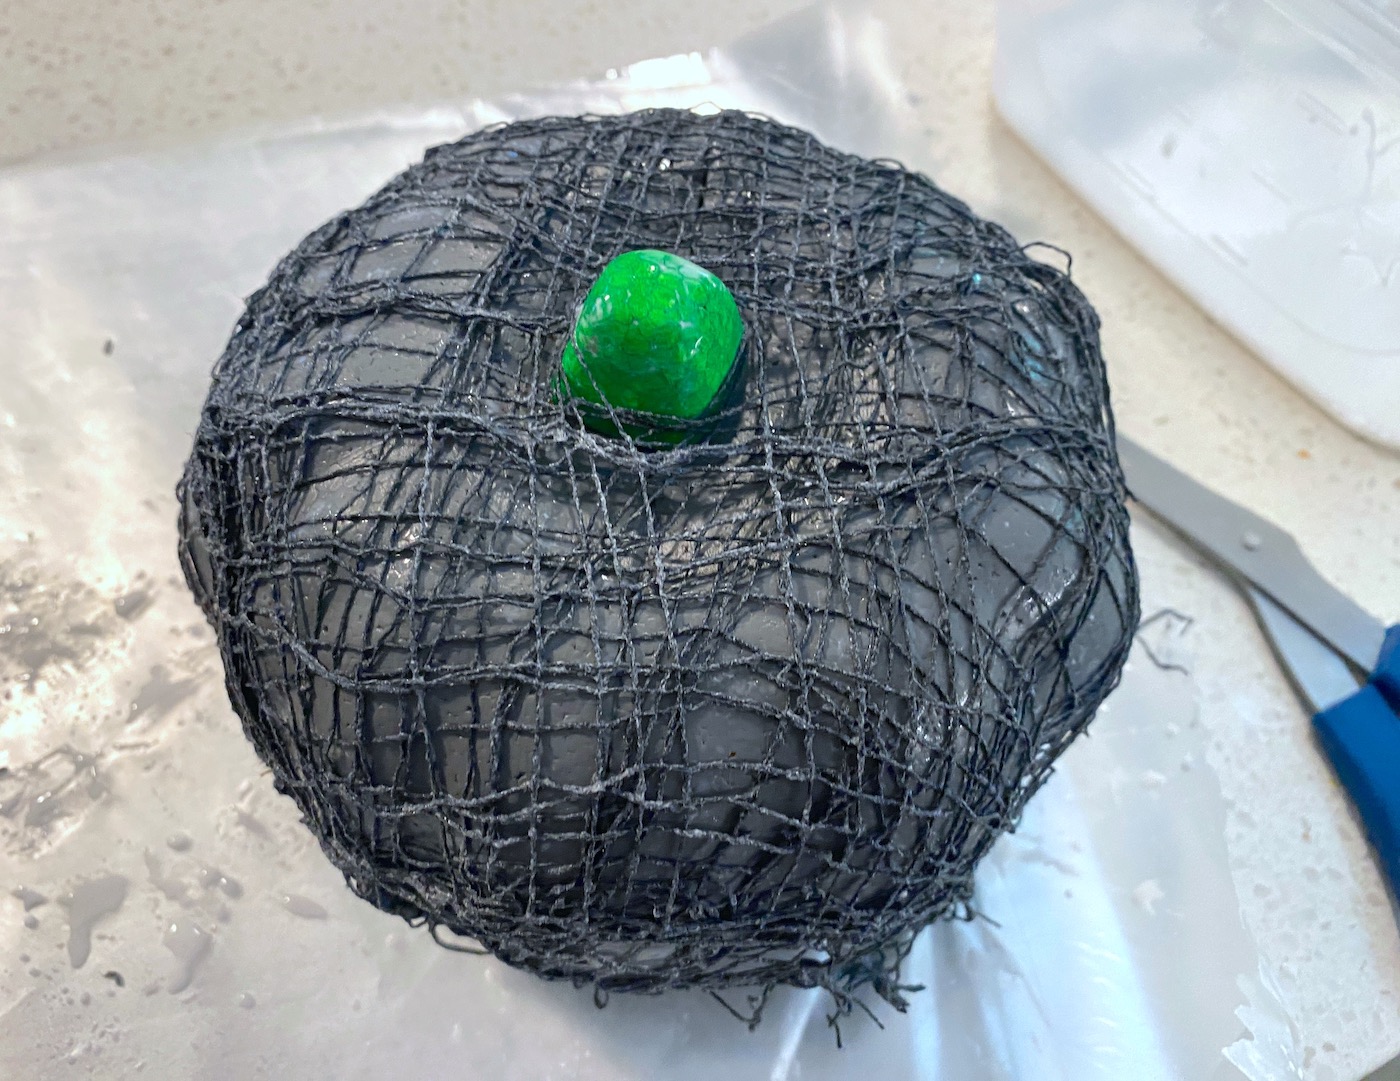 Cloth layered on top of the pumpkin